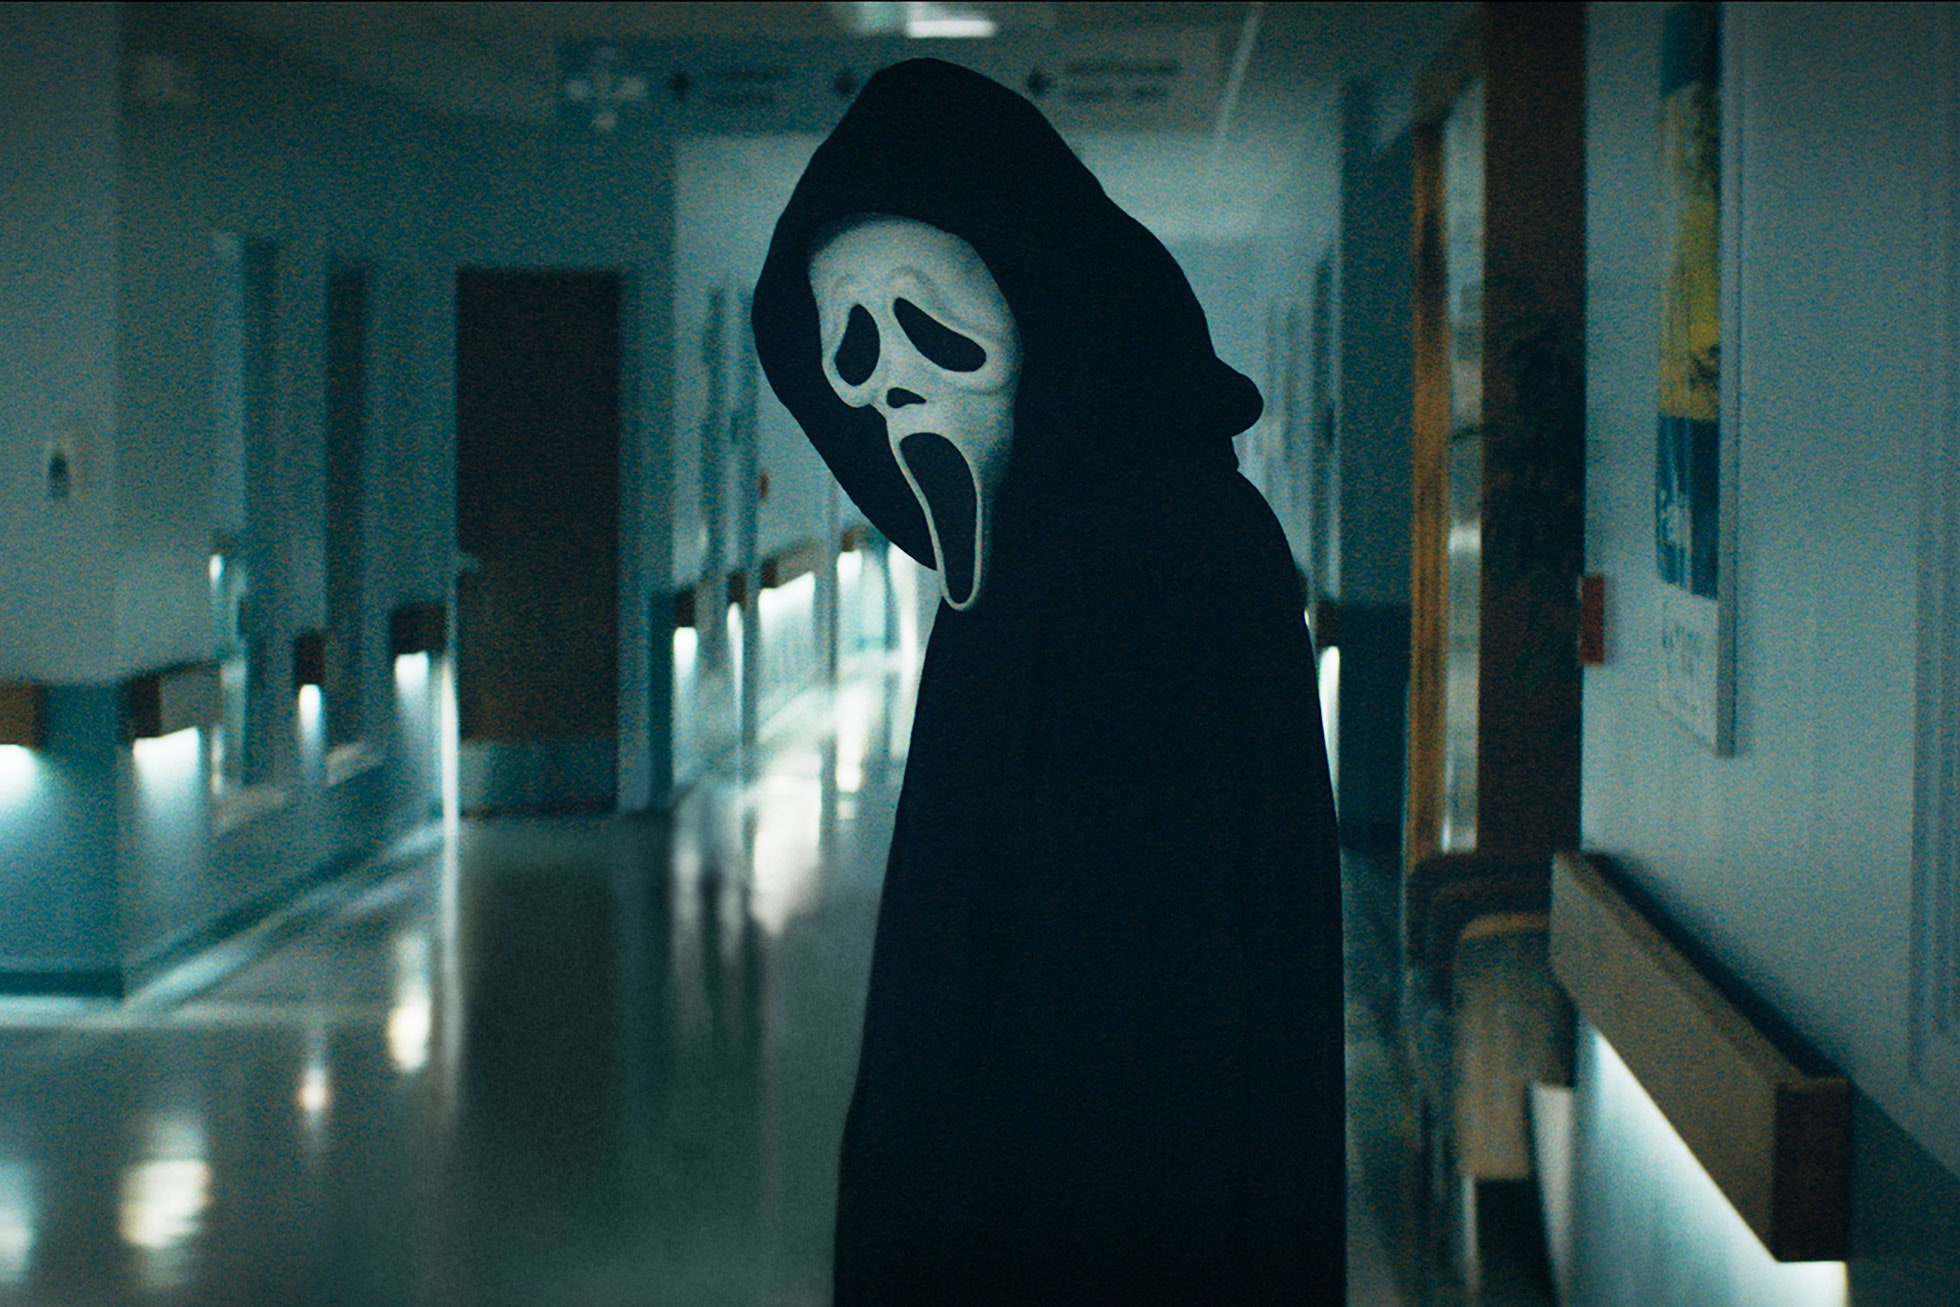 A person in costume standing by the hallway - Ghostface